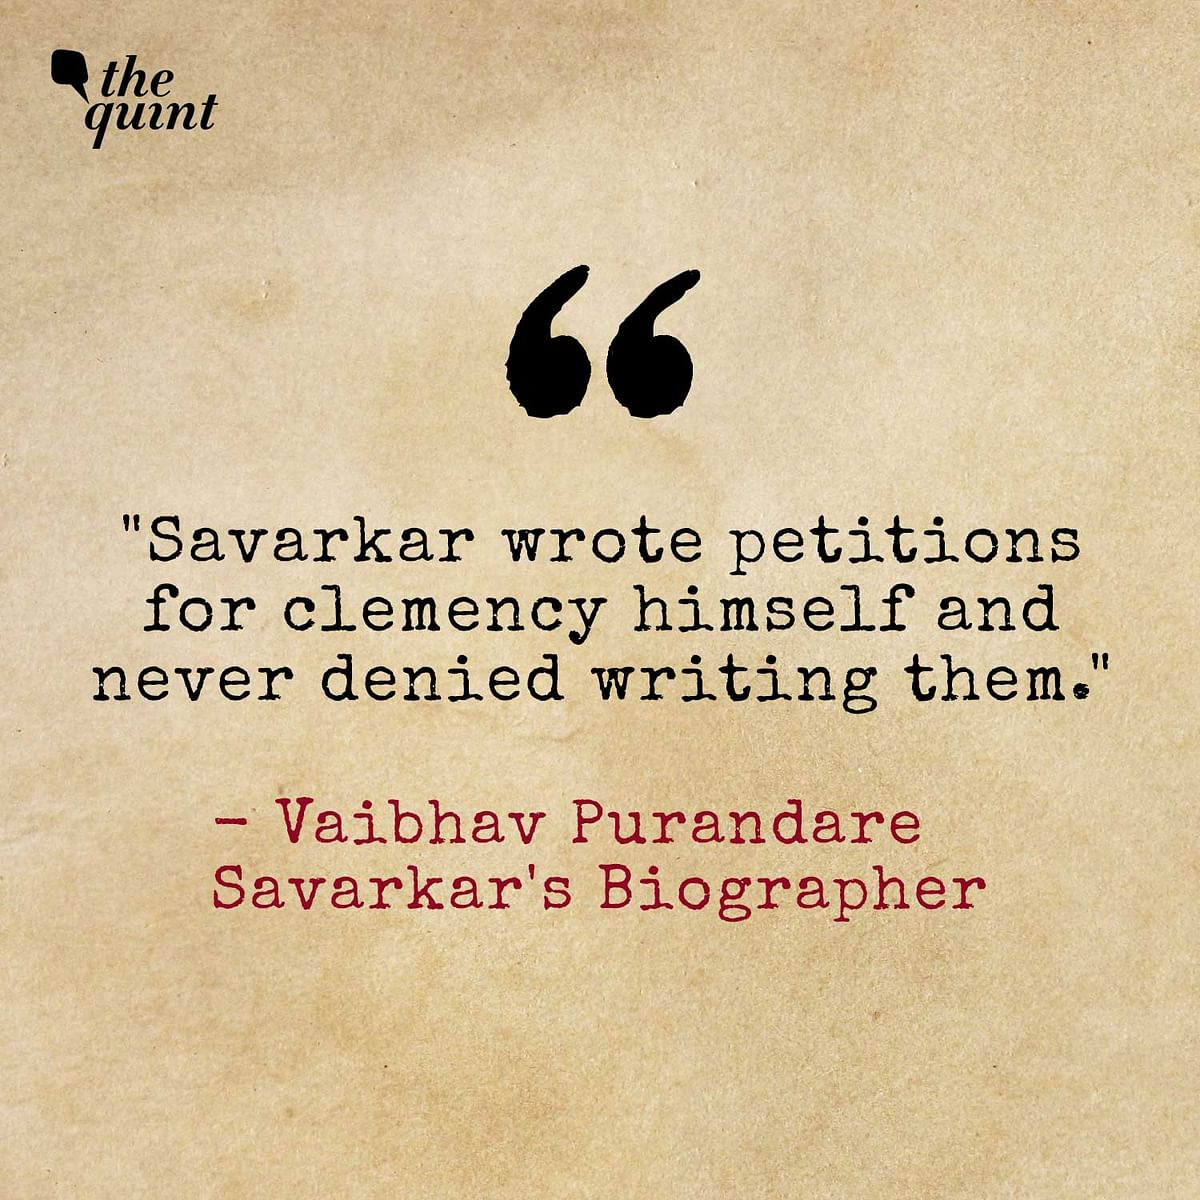 Gandhi was in favour of Savarkar's release from jail. But did he advise Savarkar to write 'mercy petitions'?